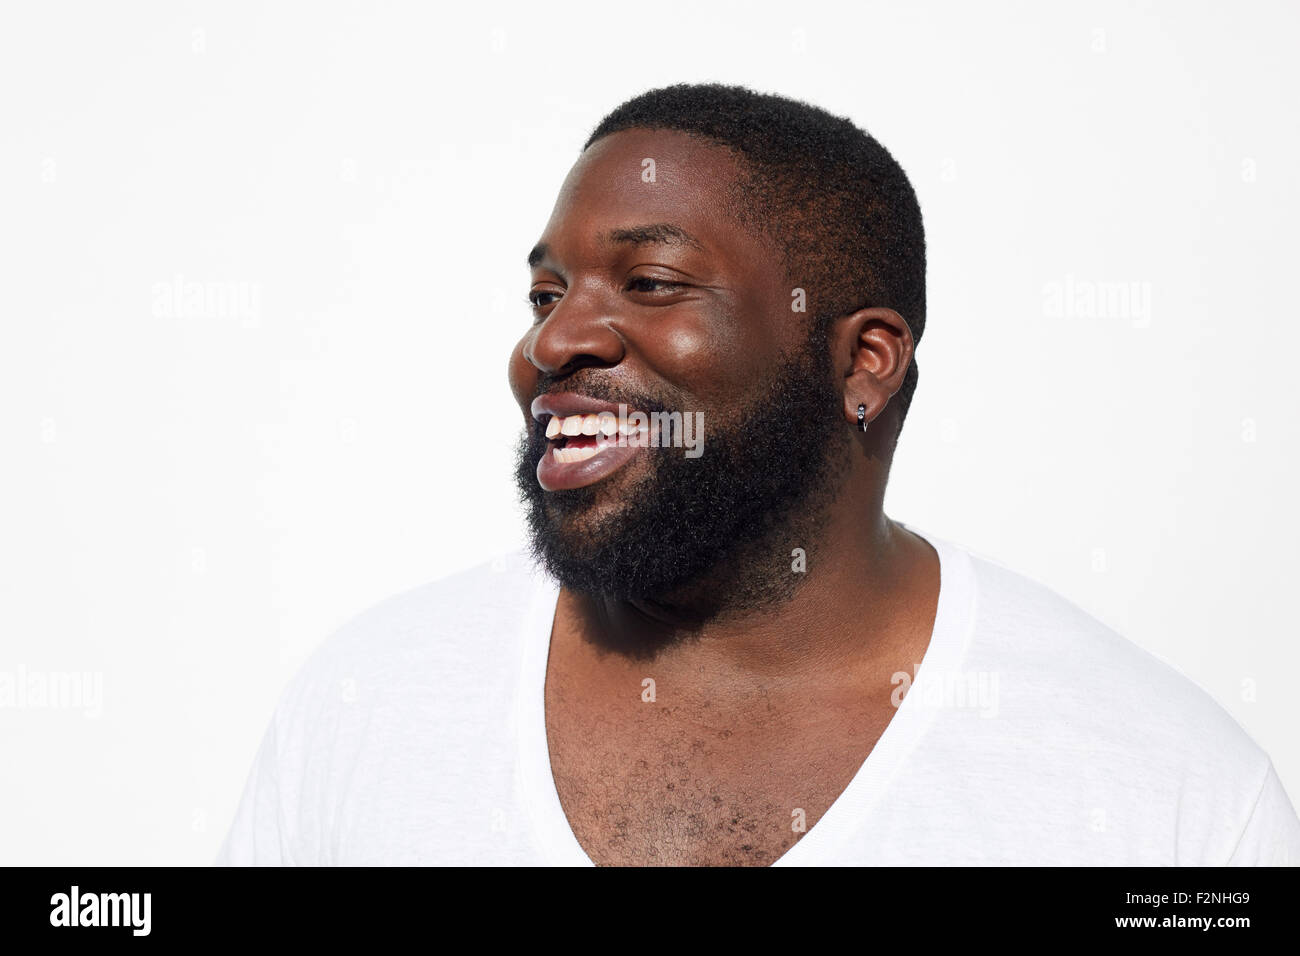 Close up of smiling Black man with beard Stock Photo